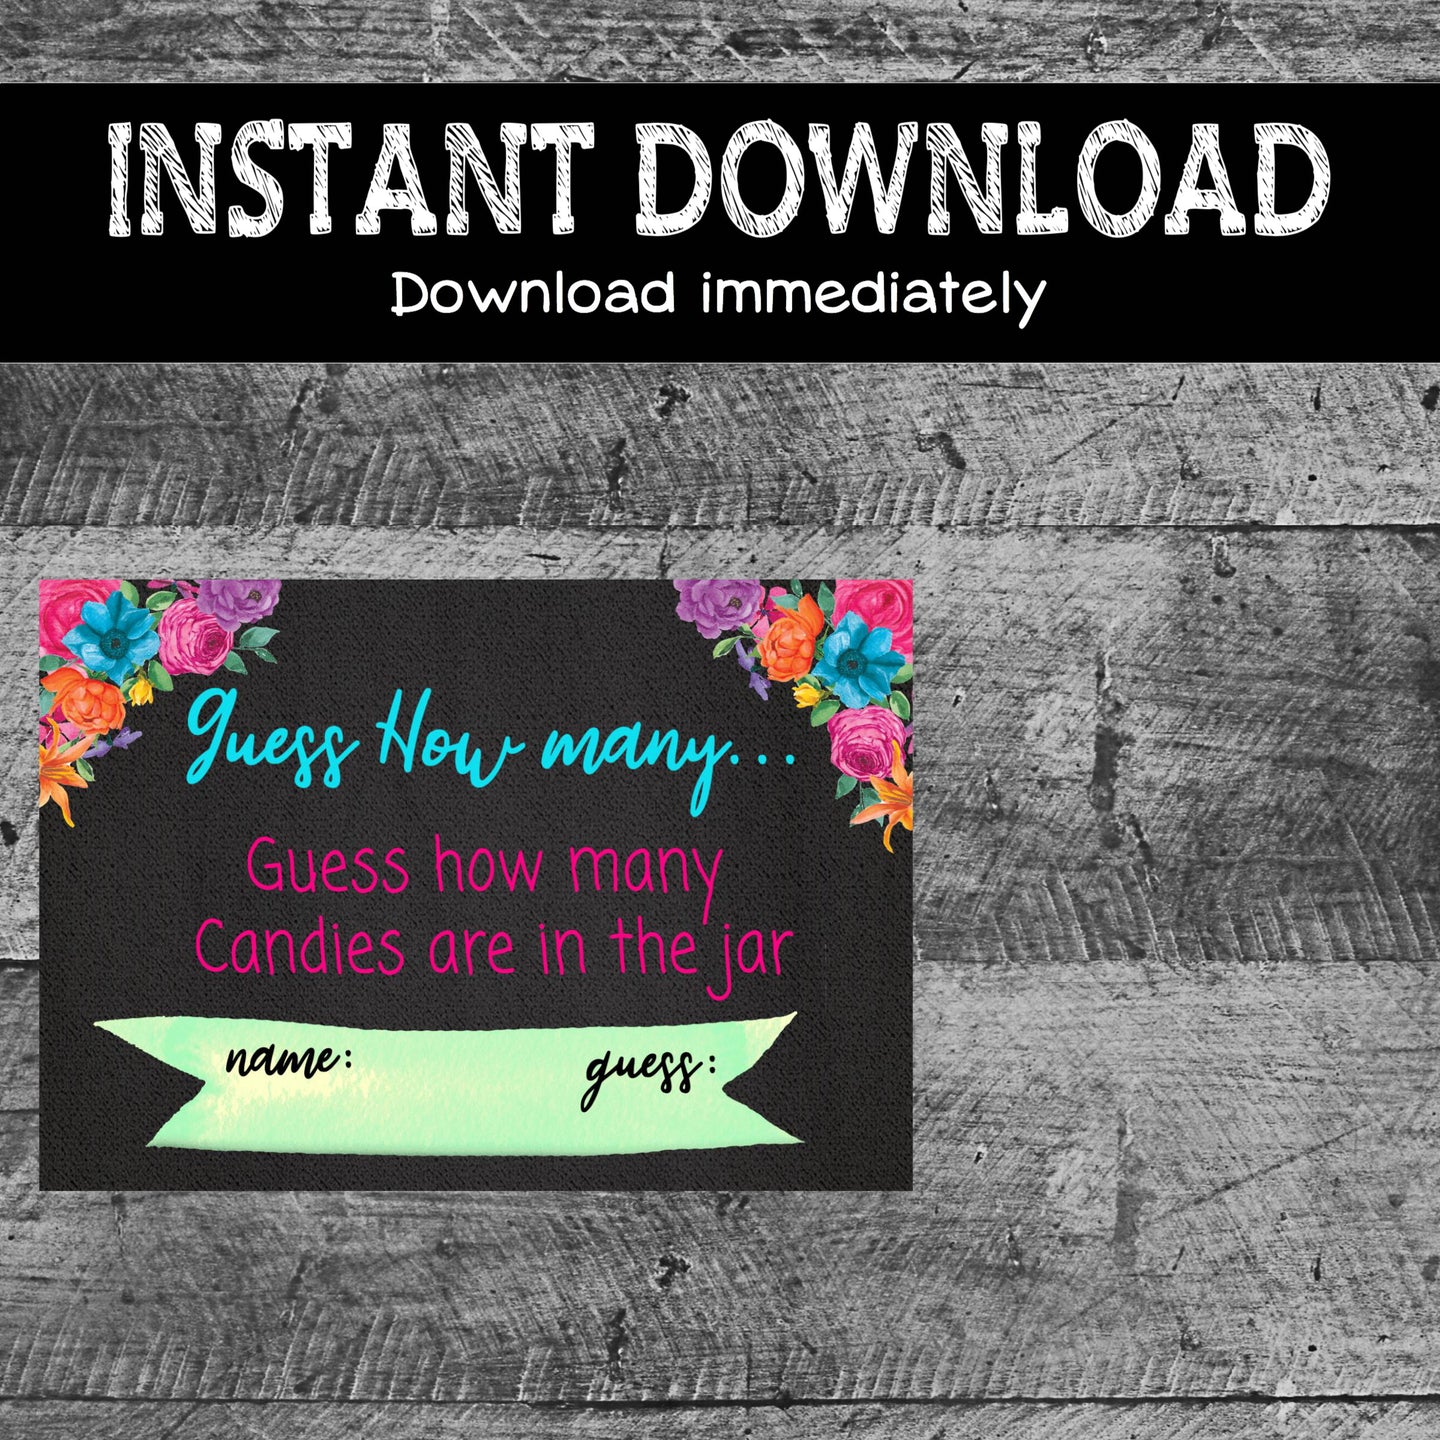 Mexicana Party | Guess how many candies game | Fiesta Baby Shower games | Printable | Instant Download | Fiesta Party Game